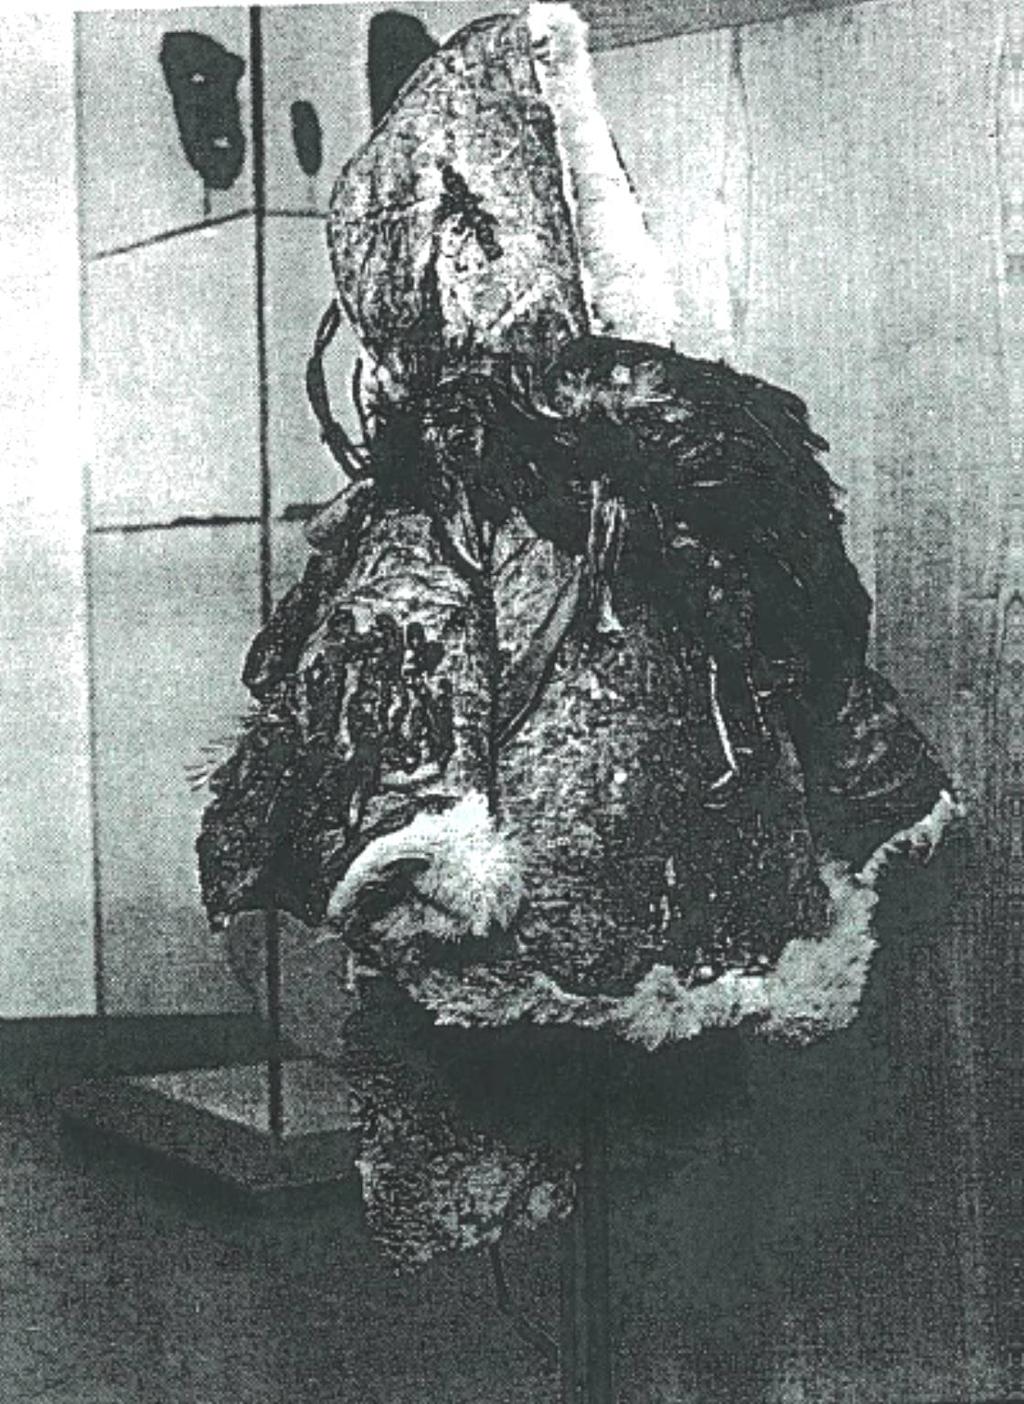 Fig. 2. Display of the amulet costume as from 1992, mounted on cotton-covered support.